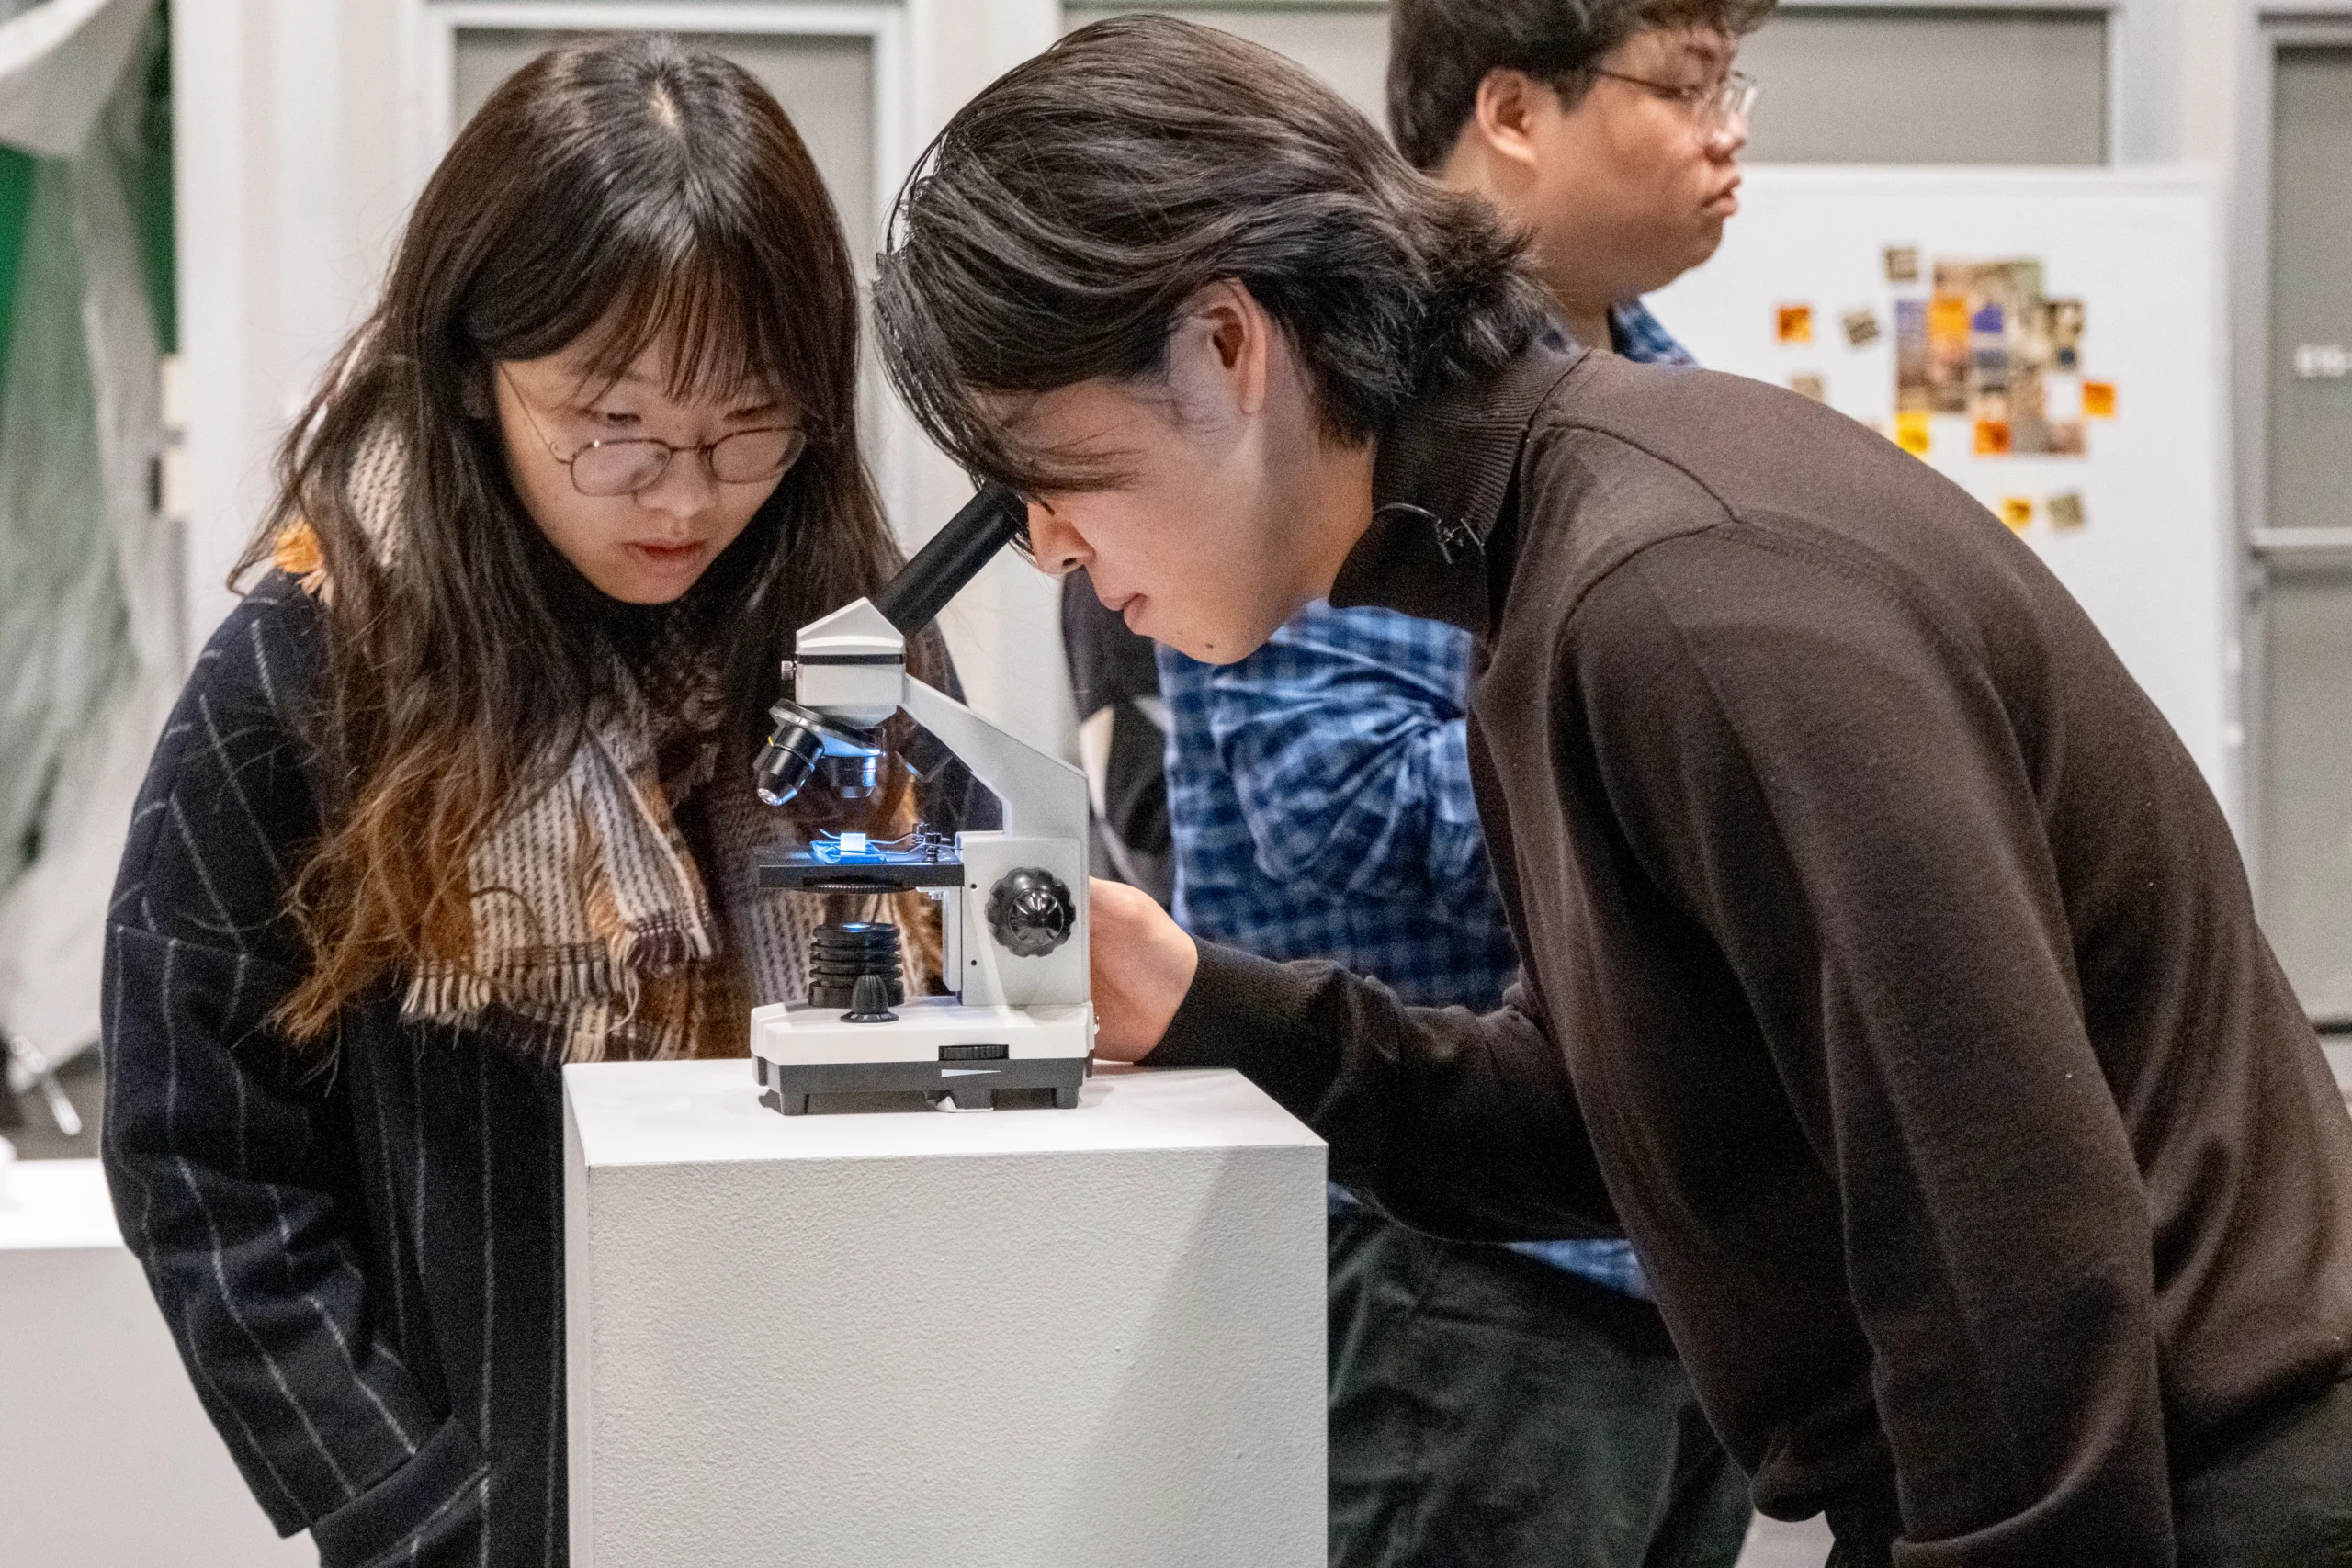 An MIT student looks into a microscope while another student looks on.